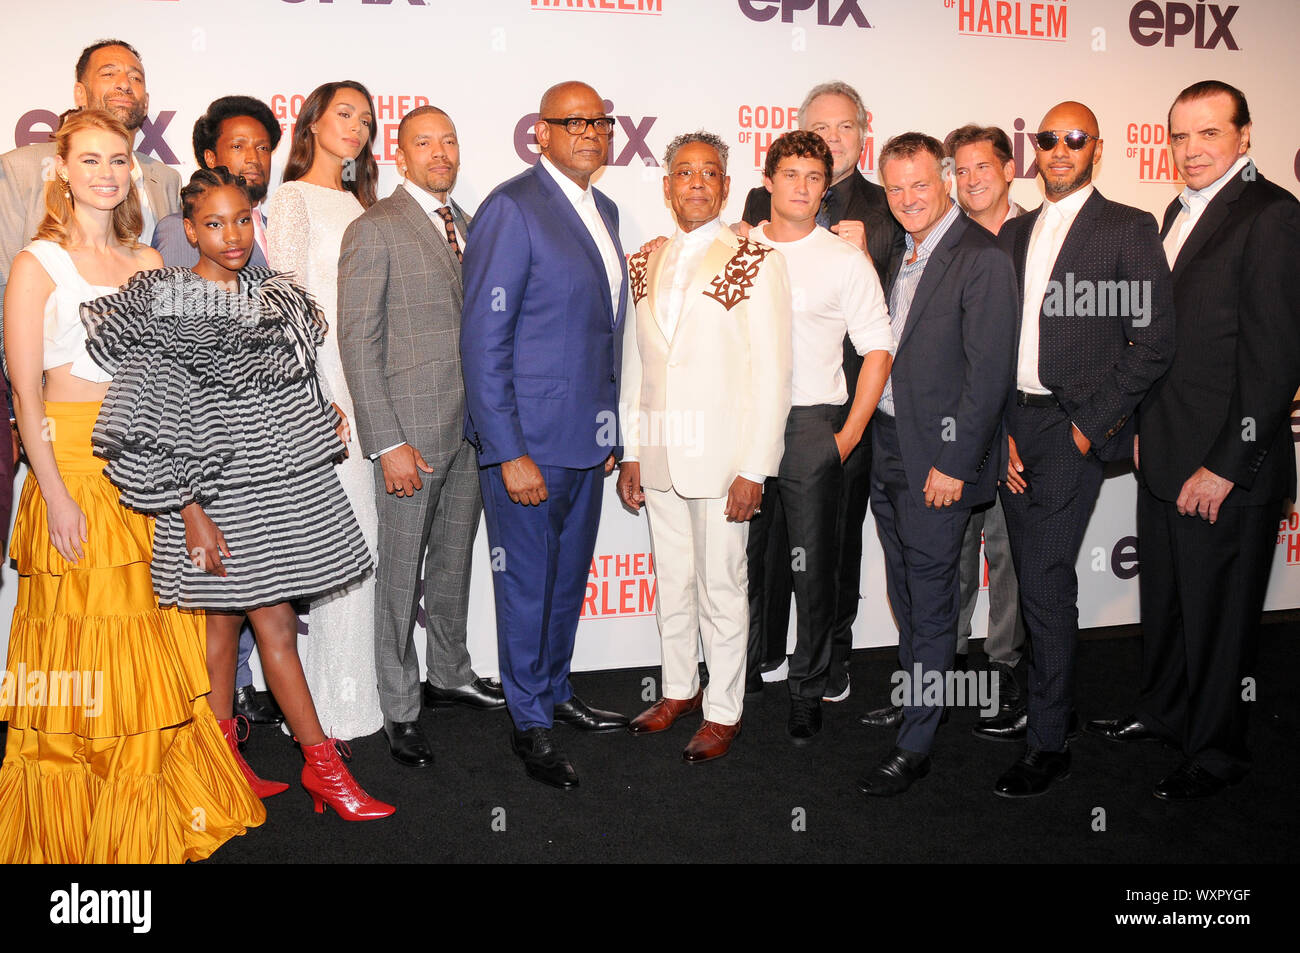 the-cast-attend-the-godfather-of-harlem-screening-at-the-apollo-theater-in-new-york-city-WXPYGF.jpg